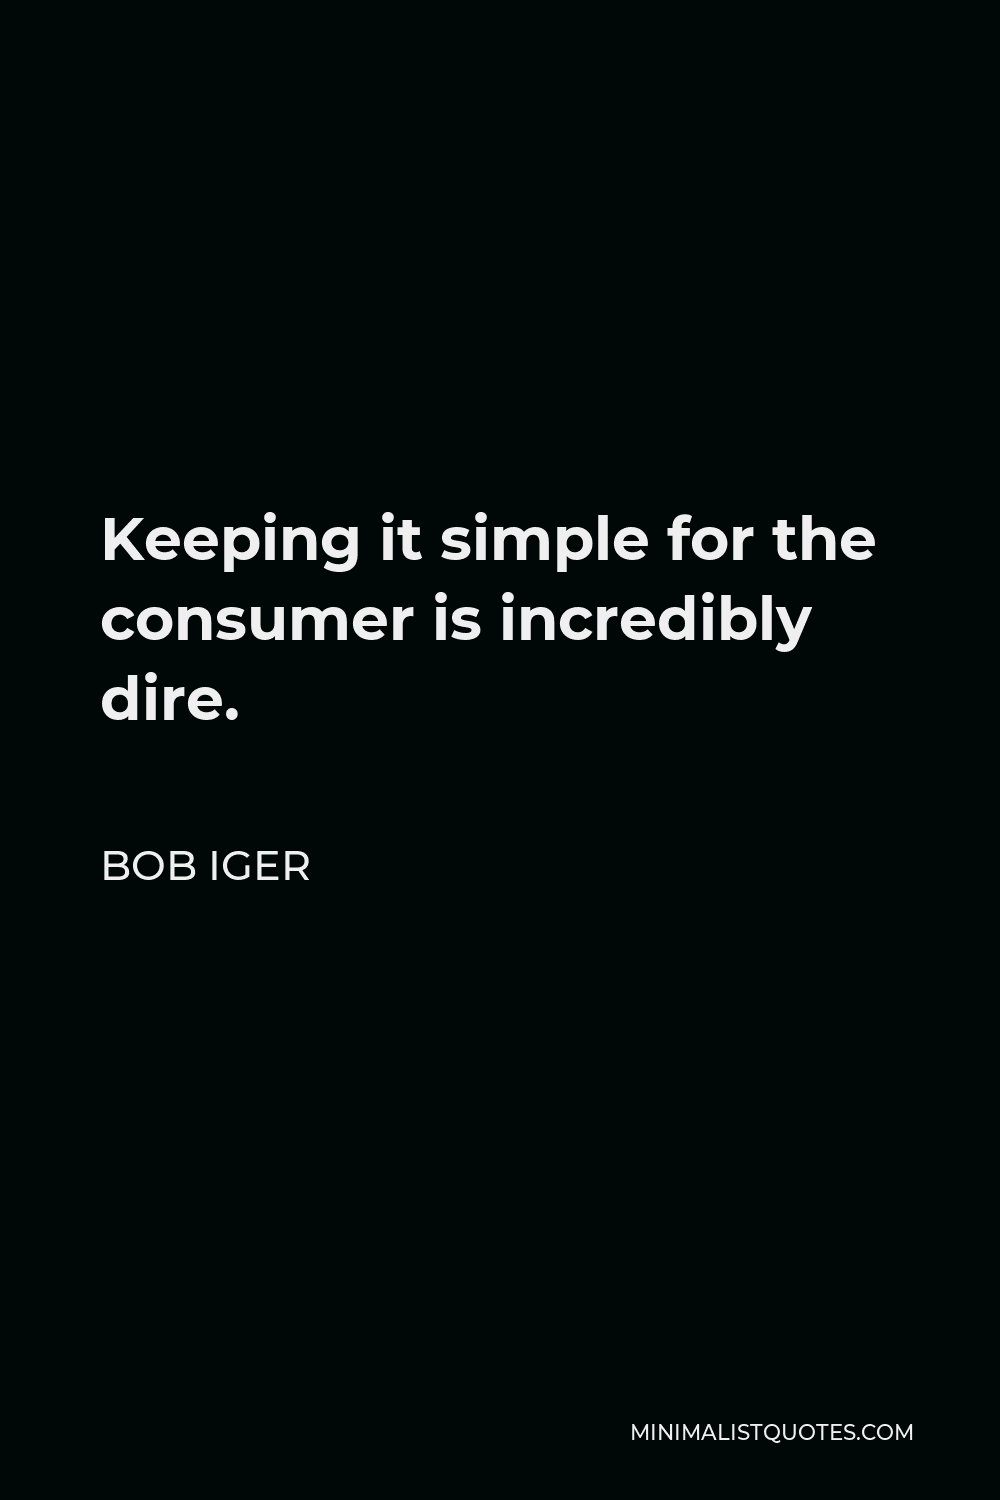 Bob Iger Quote - Keeping it simple for the consumer is incredibly dire.